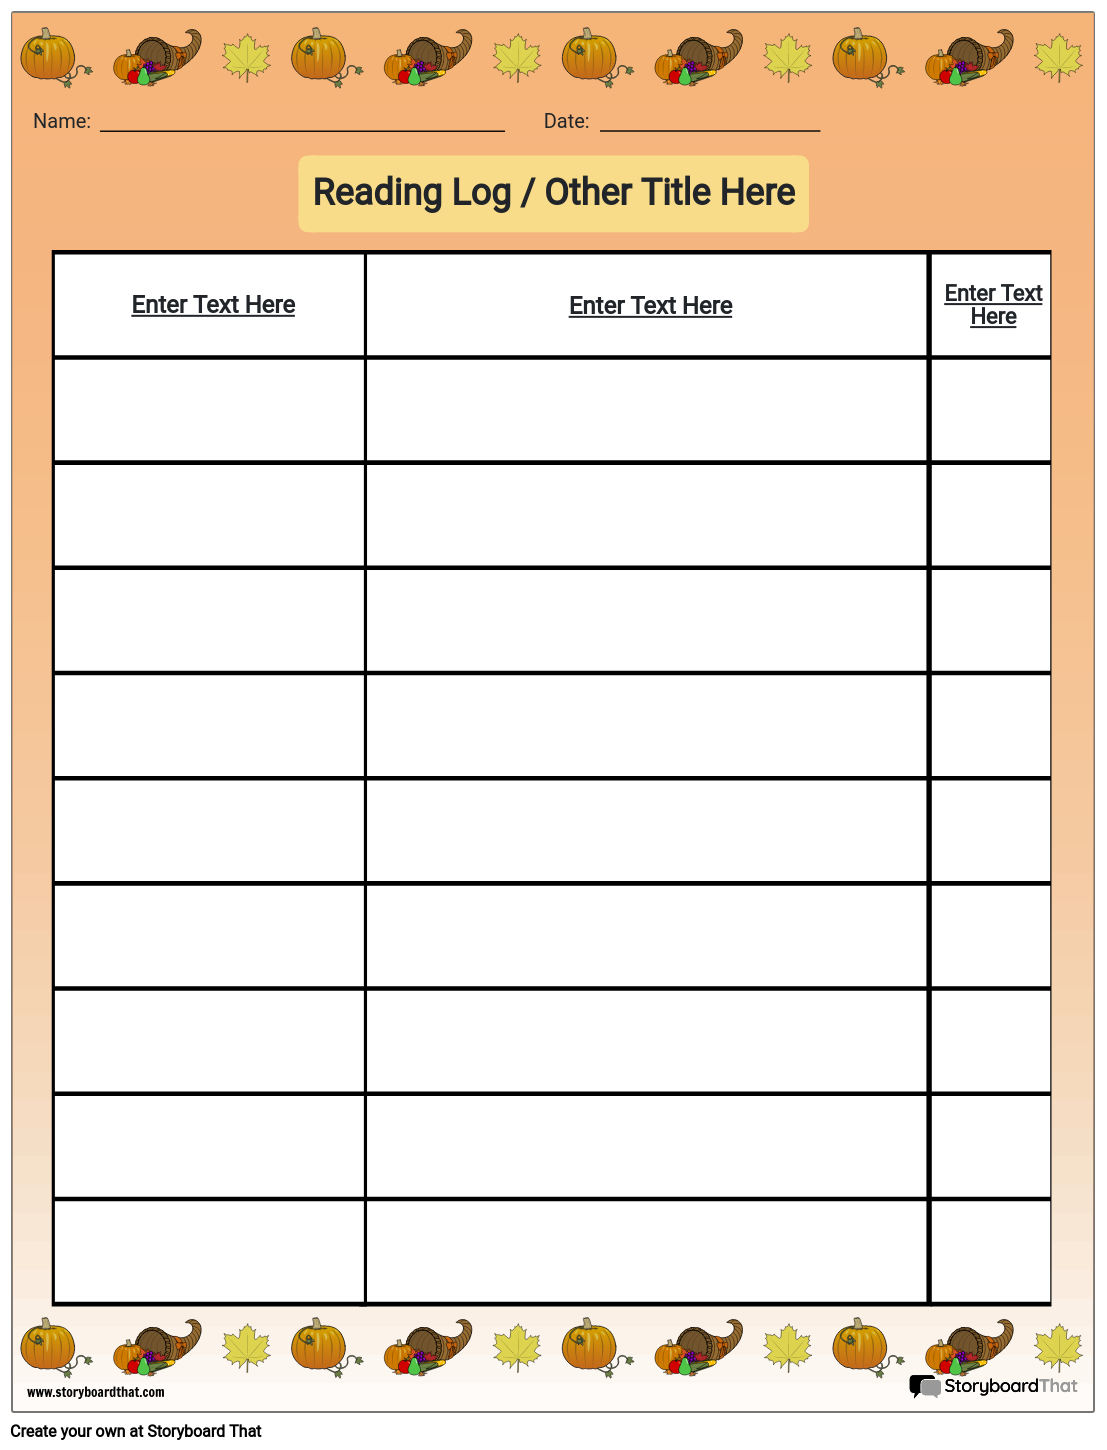 Reading Log Template Create A Reading Log StoryboardThat